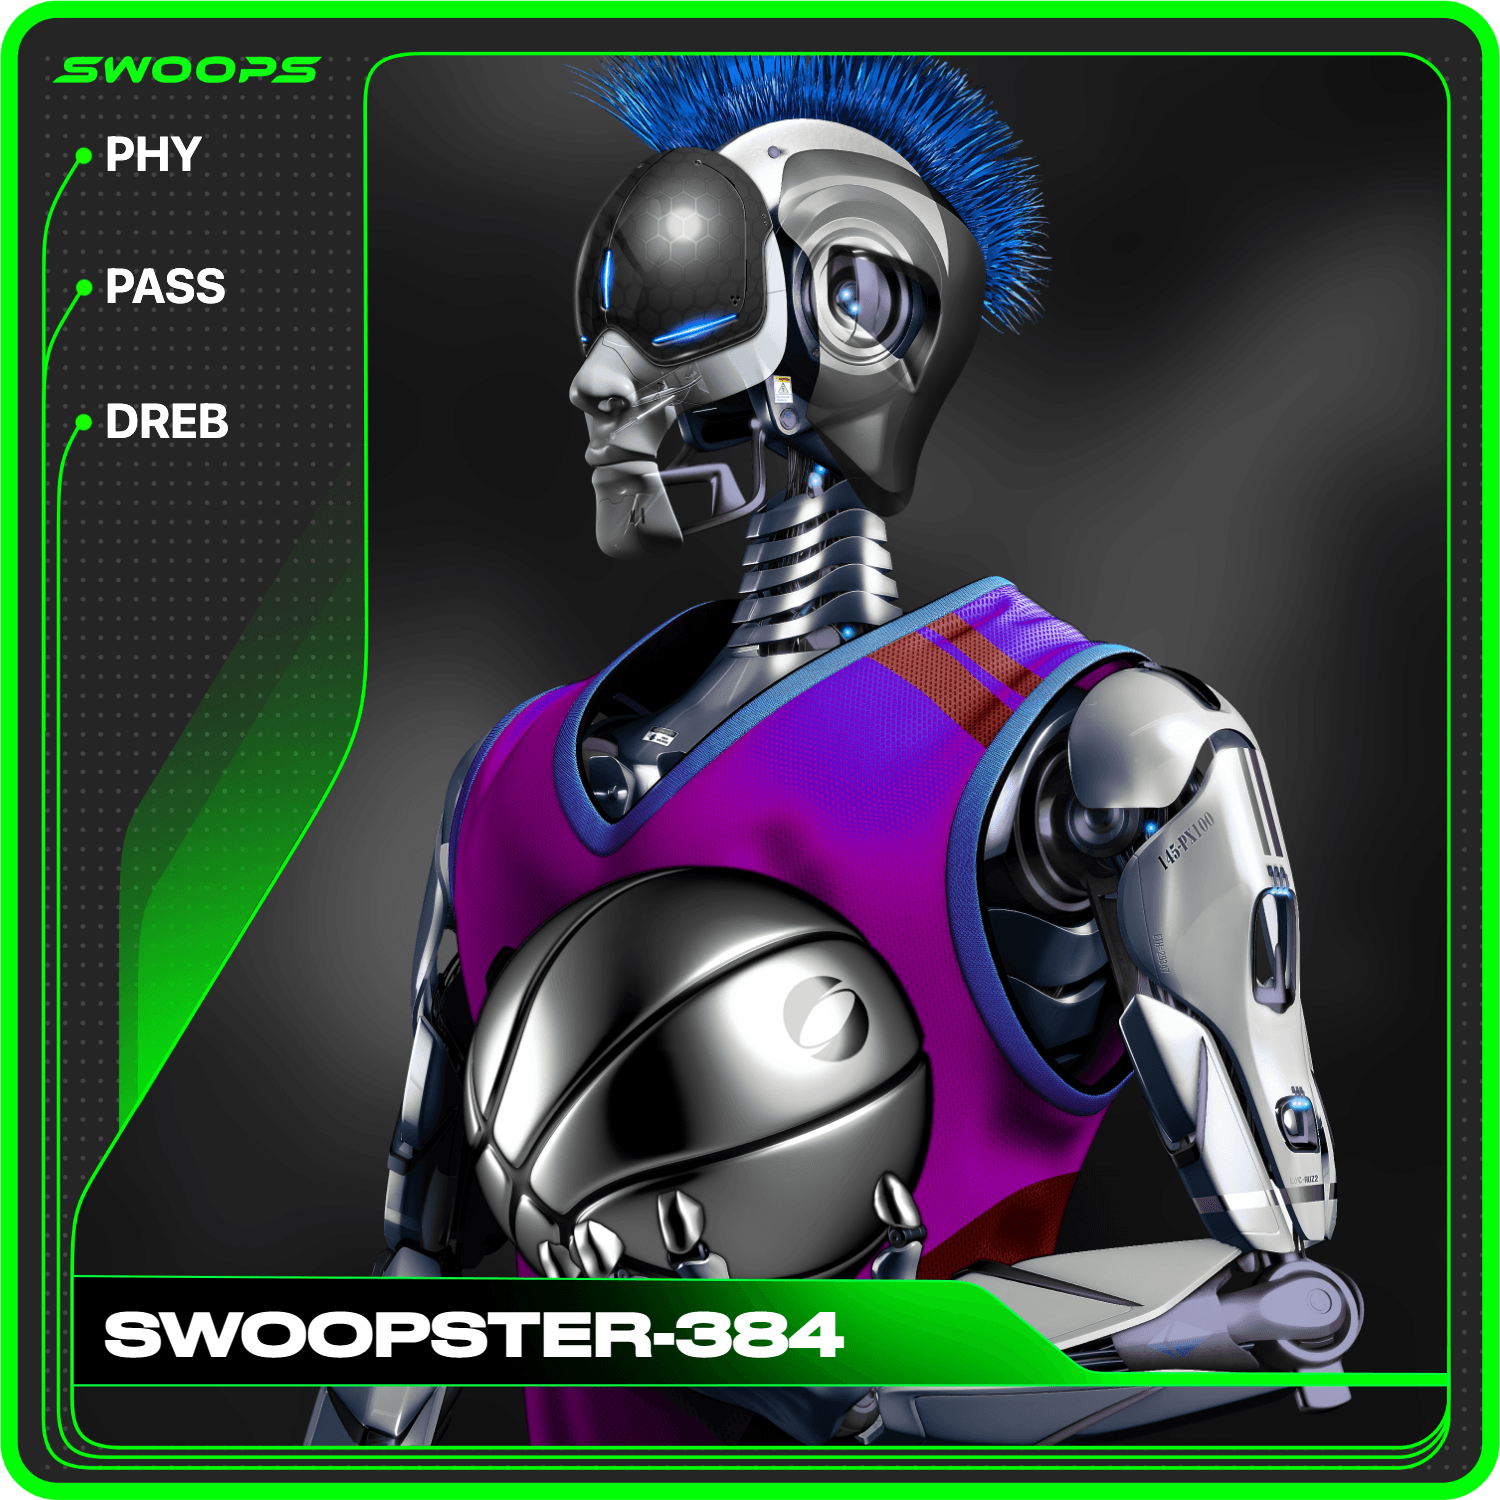 SWOOPSTER-384